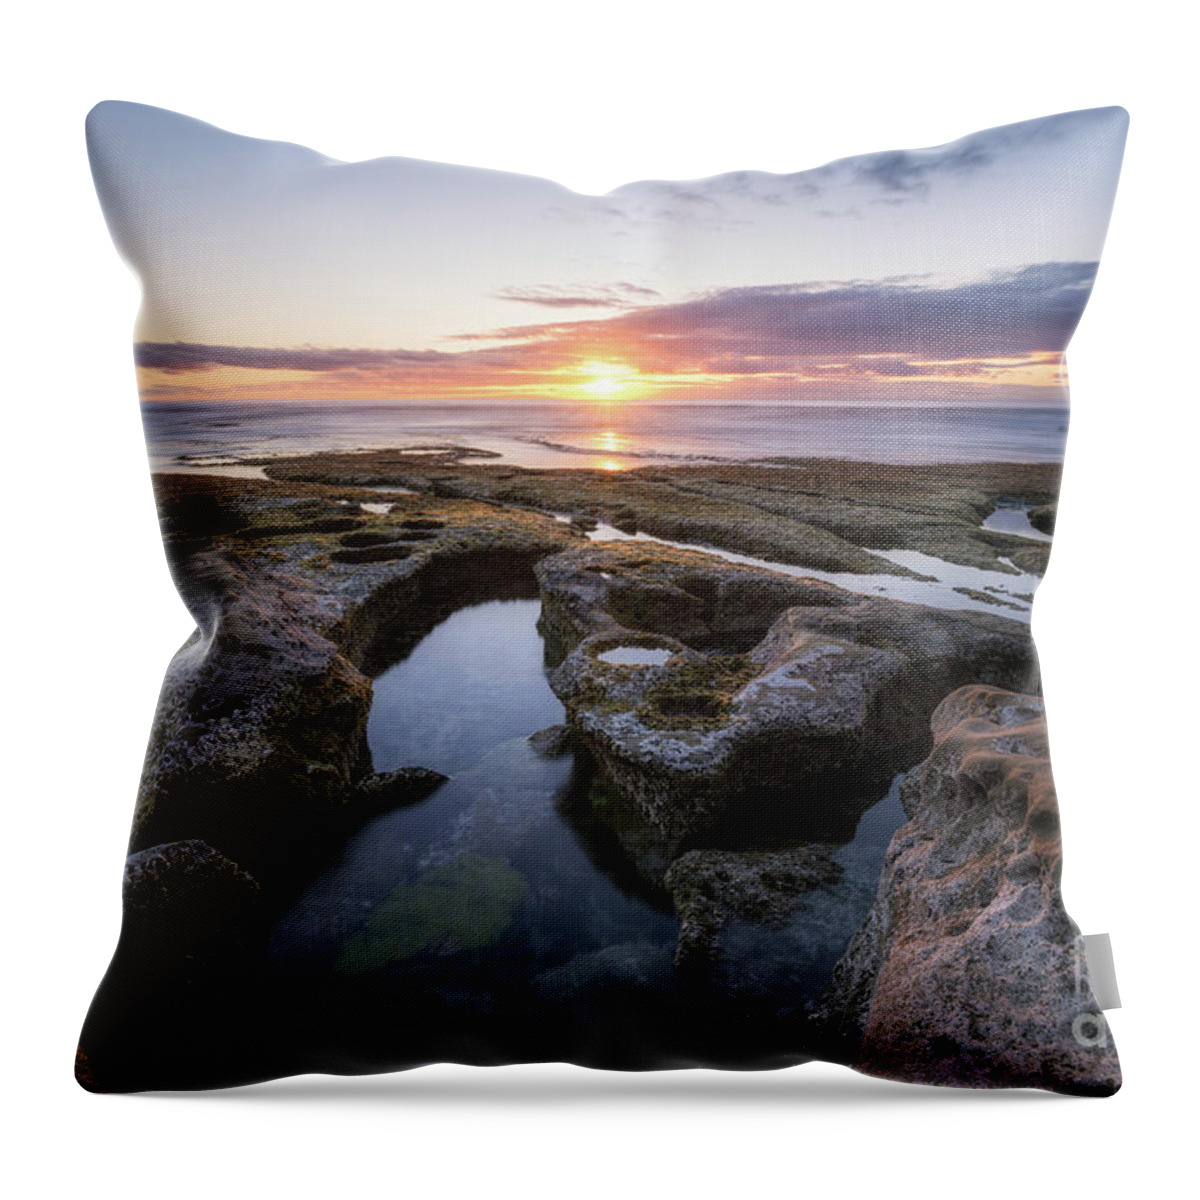 La Jolla Throw Pillow featuring the photograph La Jolla Tide Pool Sunset by Michael Ver Sprill